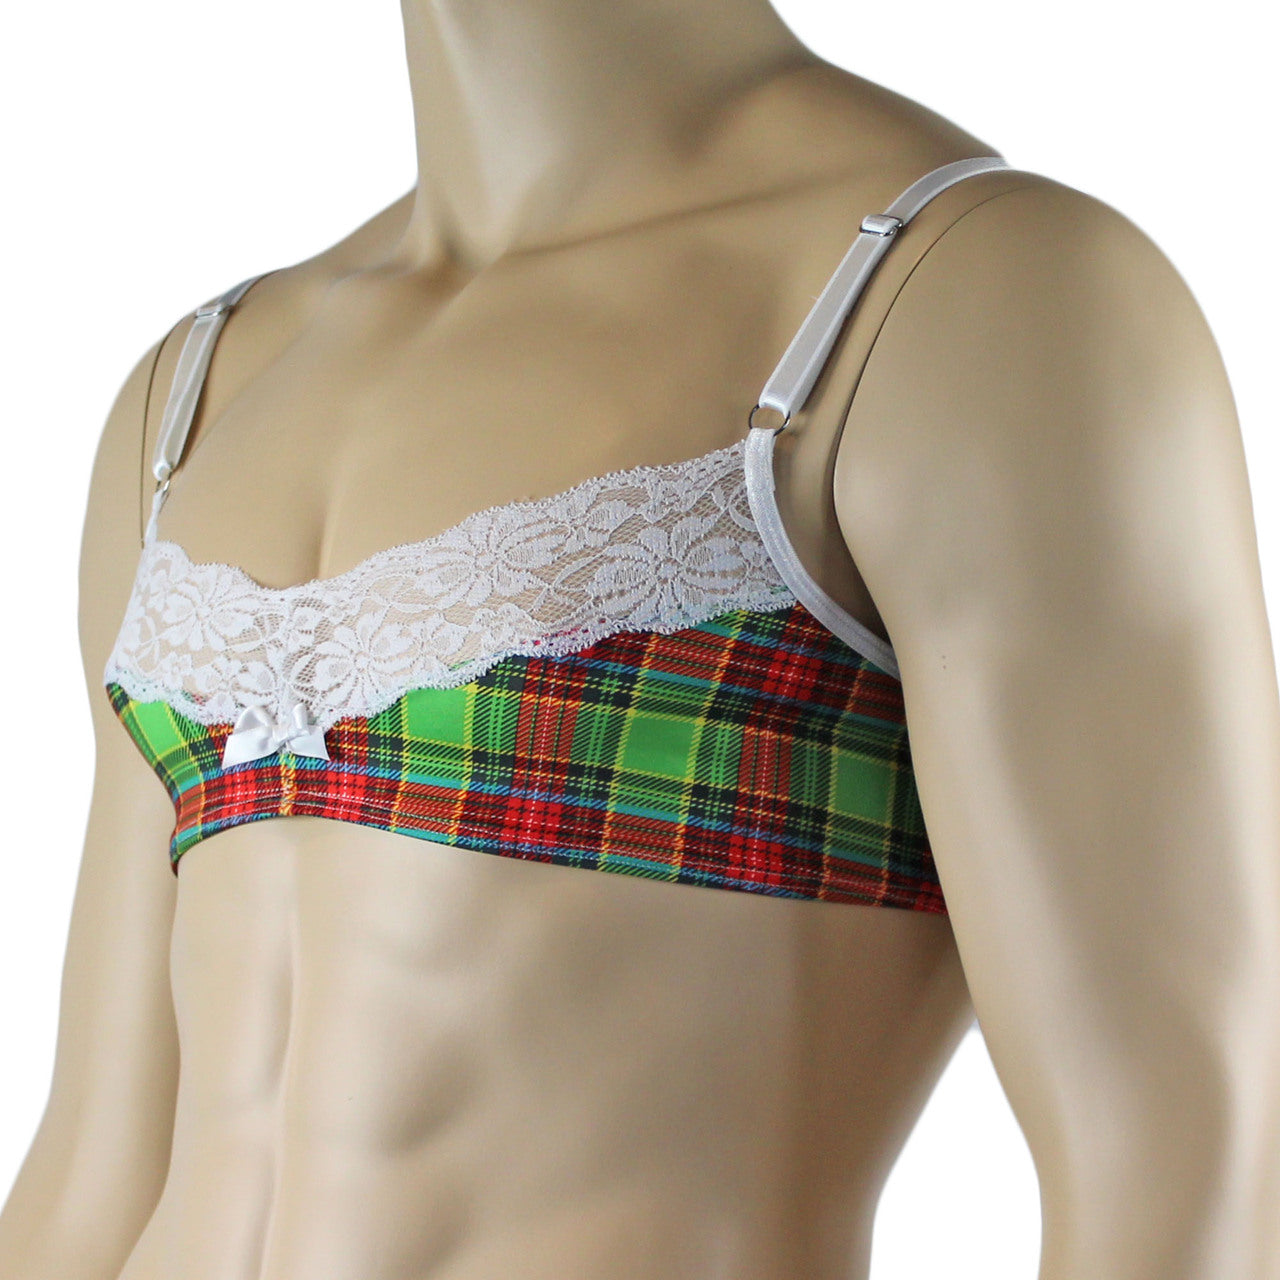 Mens Plaid Tartan Bra Top with floral Lace Detail Green and Red